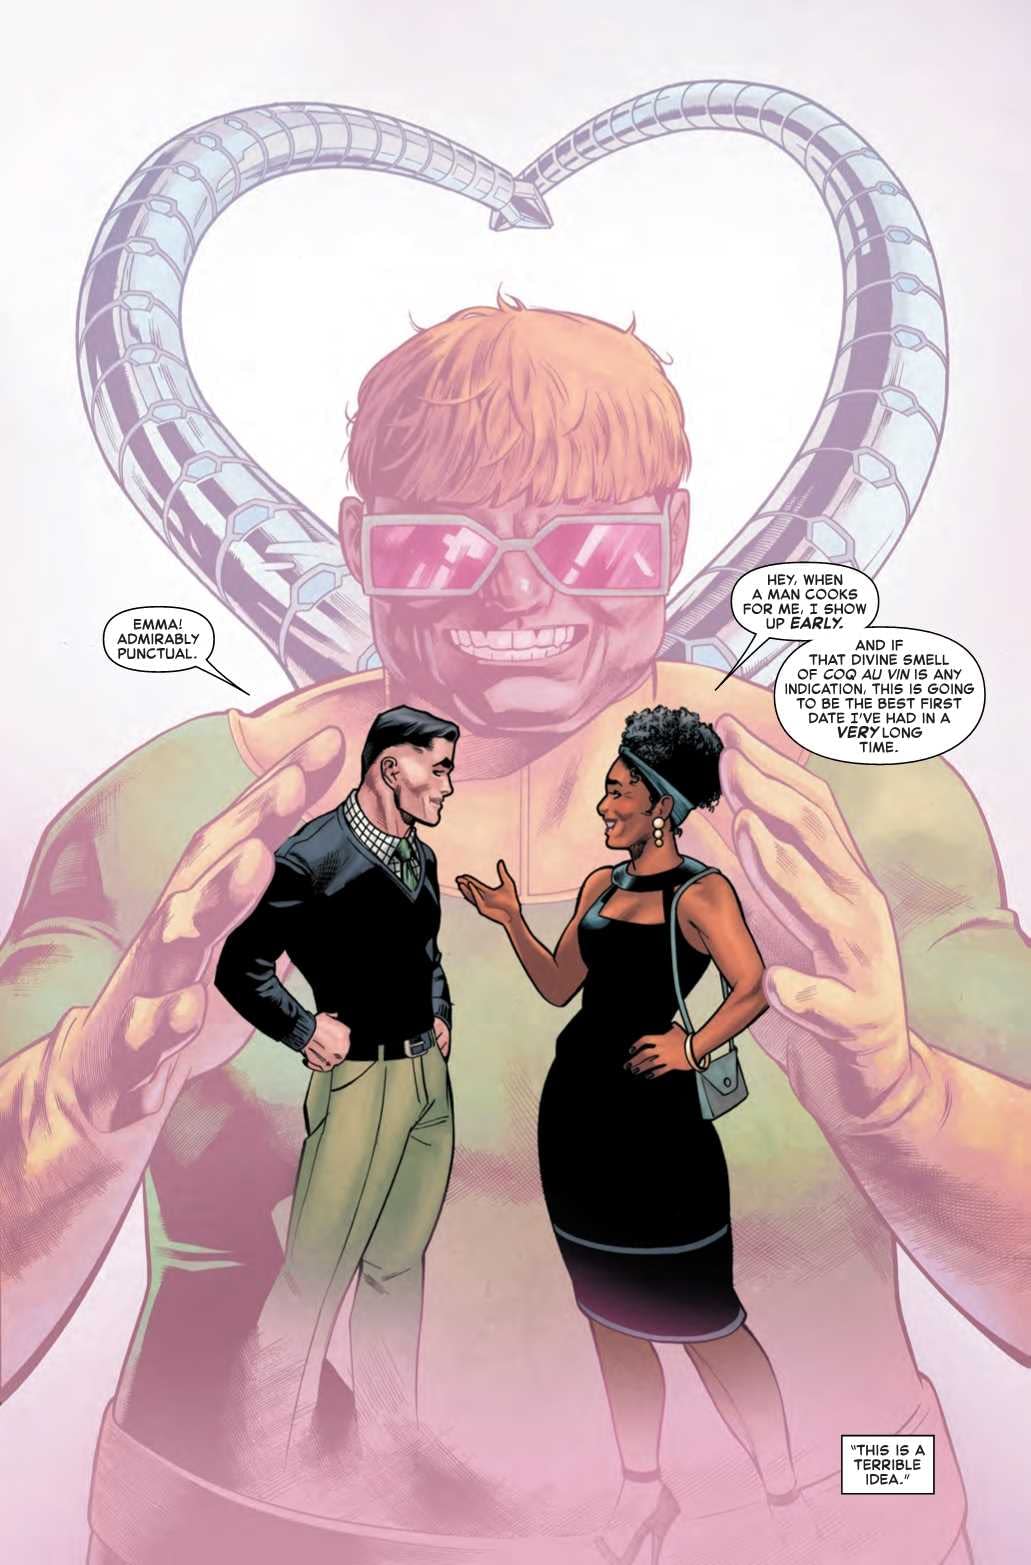 Doctor Octopus Gets Woke in This Superior Spider-Man #5 Preview